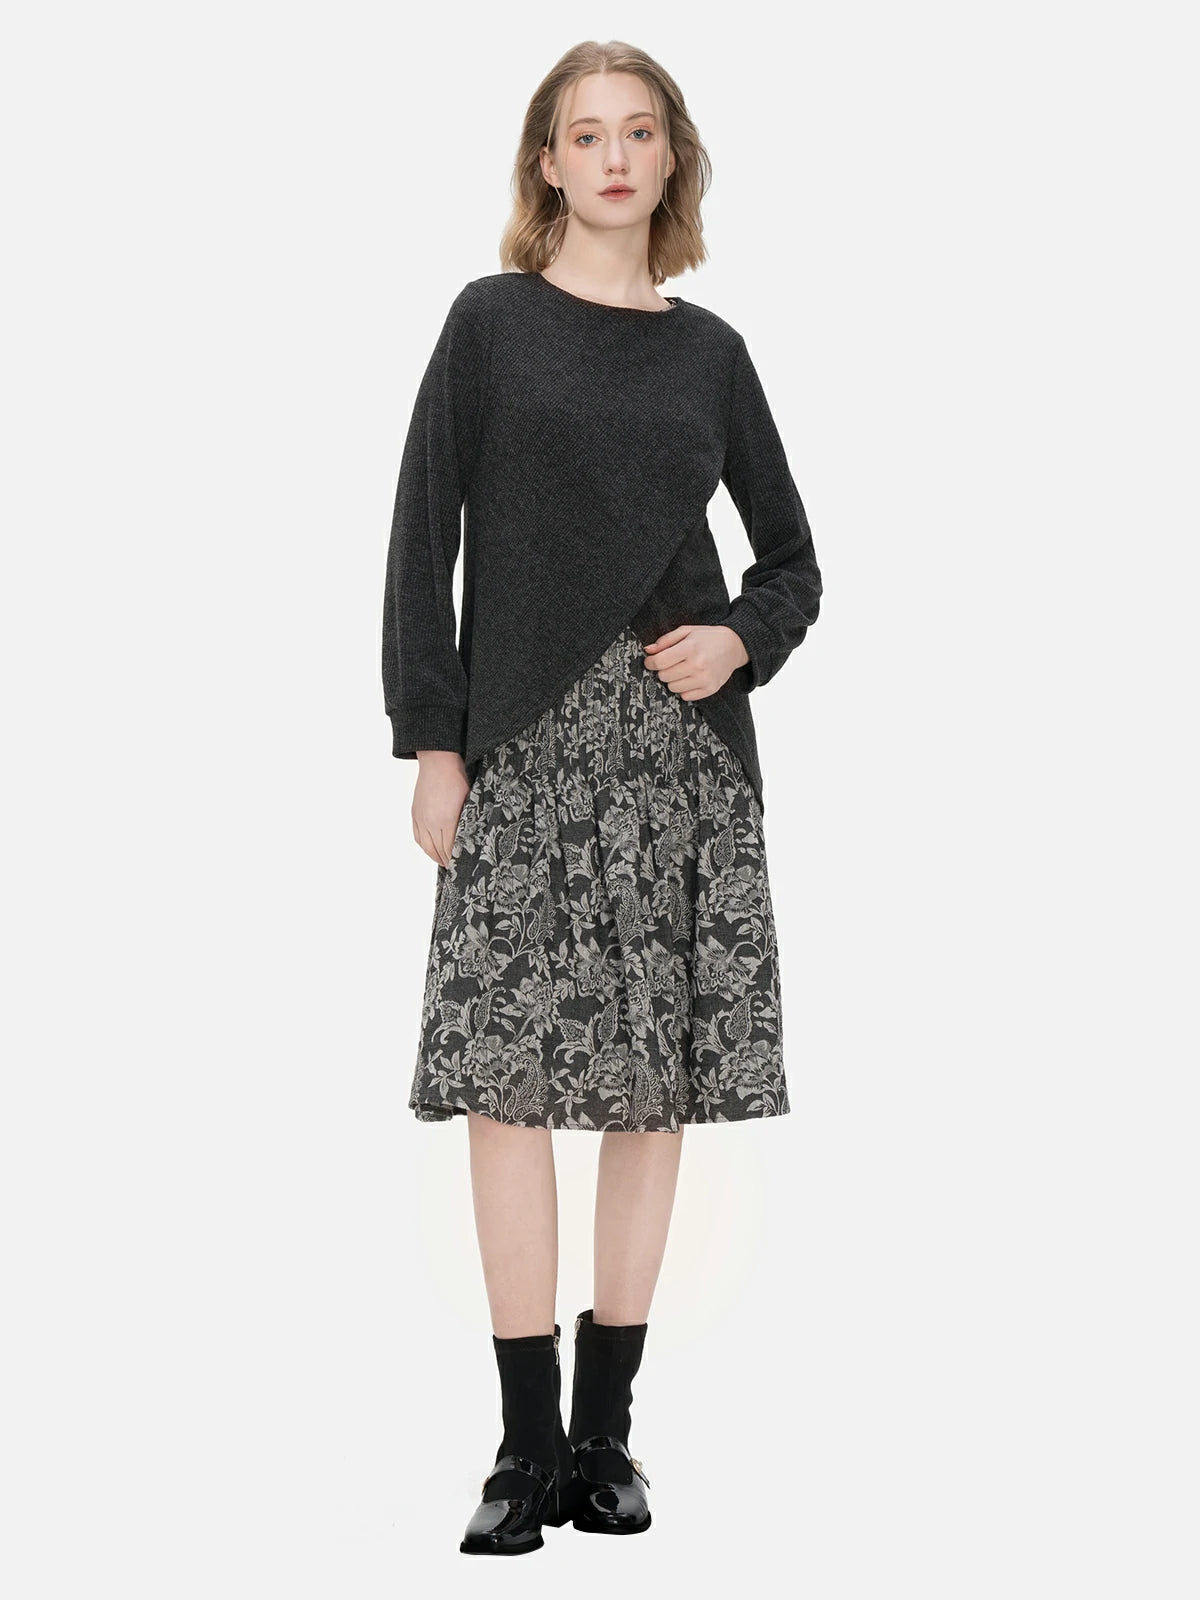 Stylish two-piece ensemble featuring a round-neck pullover sweater with an irregular hem design and a sleeveless dress adorned with a pleated floral print.